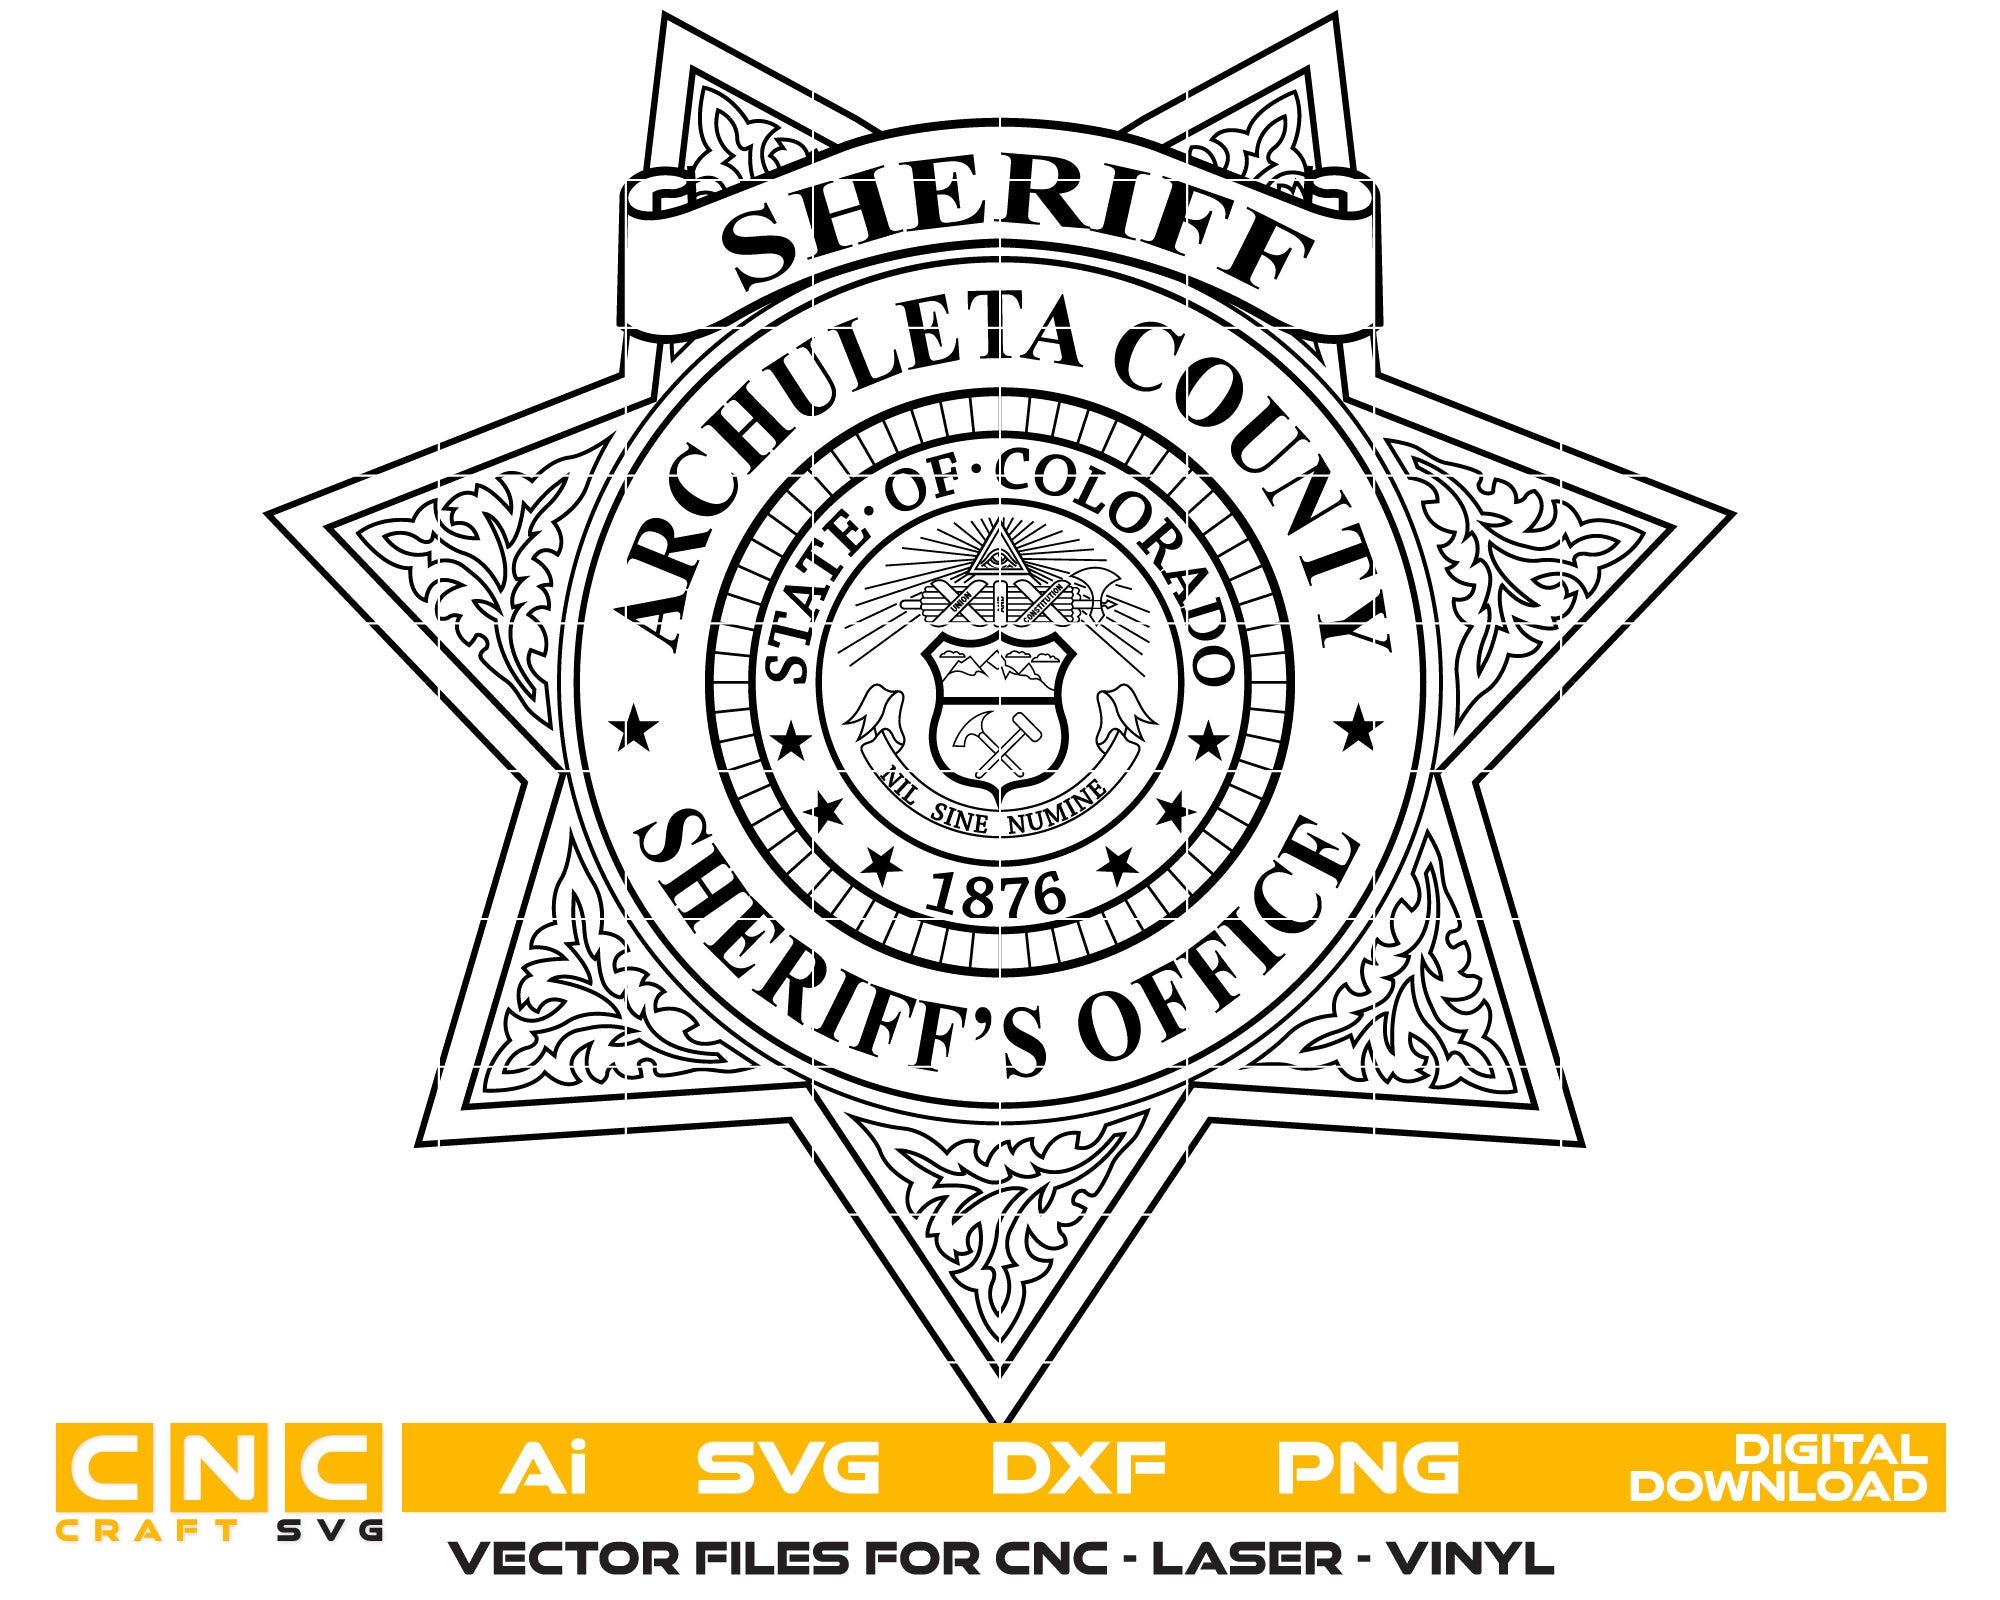 Archuleta County Sheriff Office Badge Vector Art, Ai,SVG, DXF, PNG, Digital Files